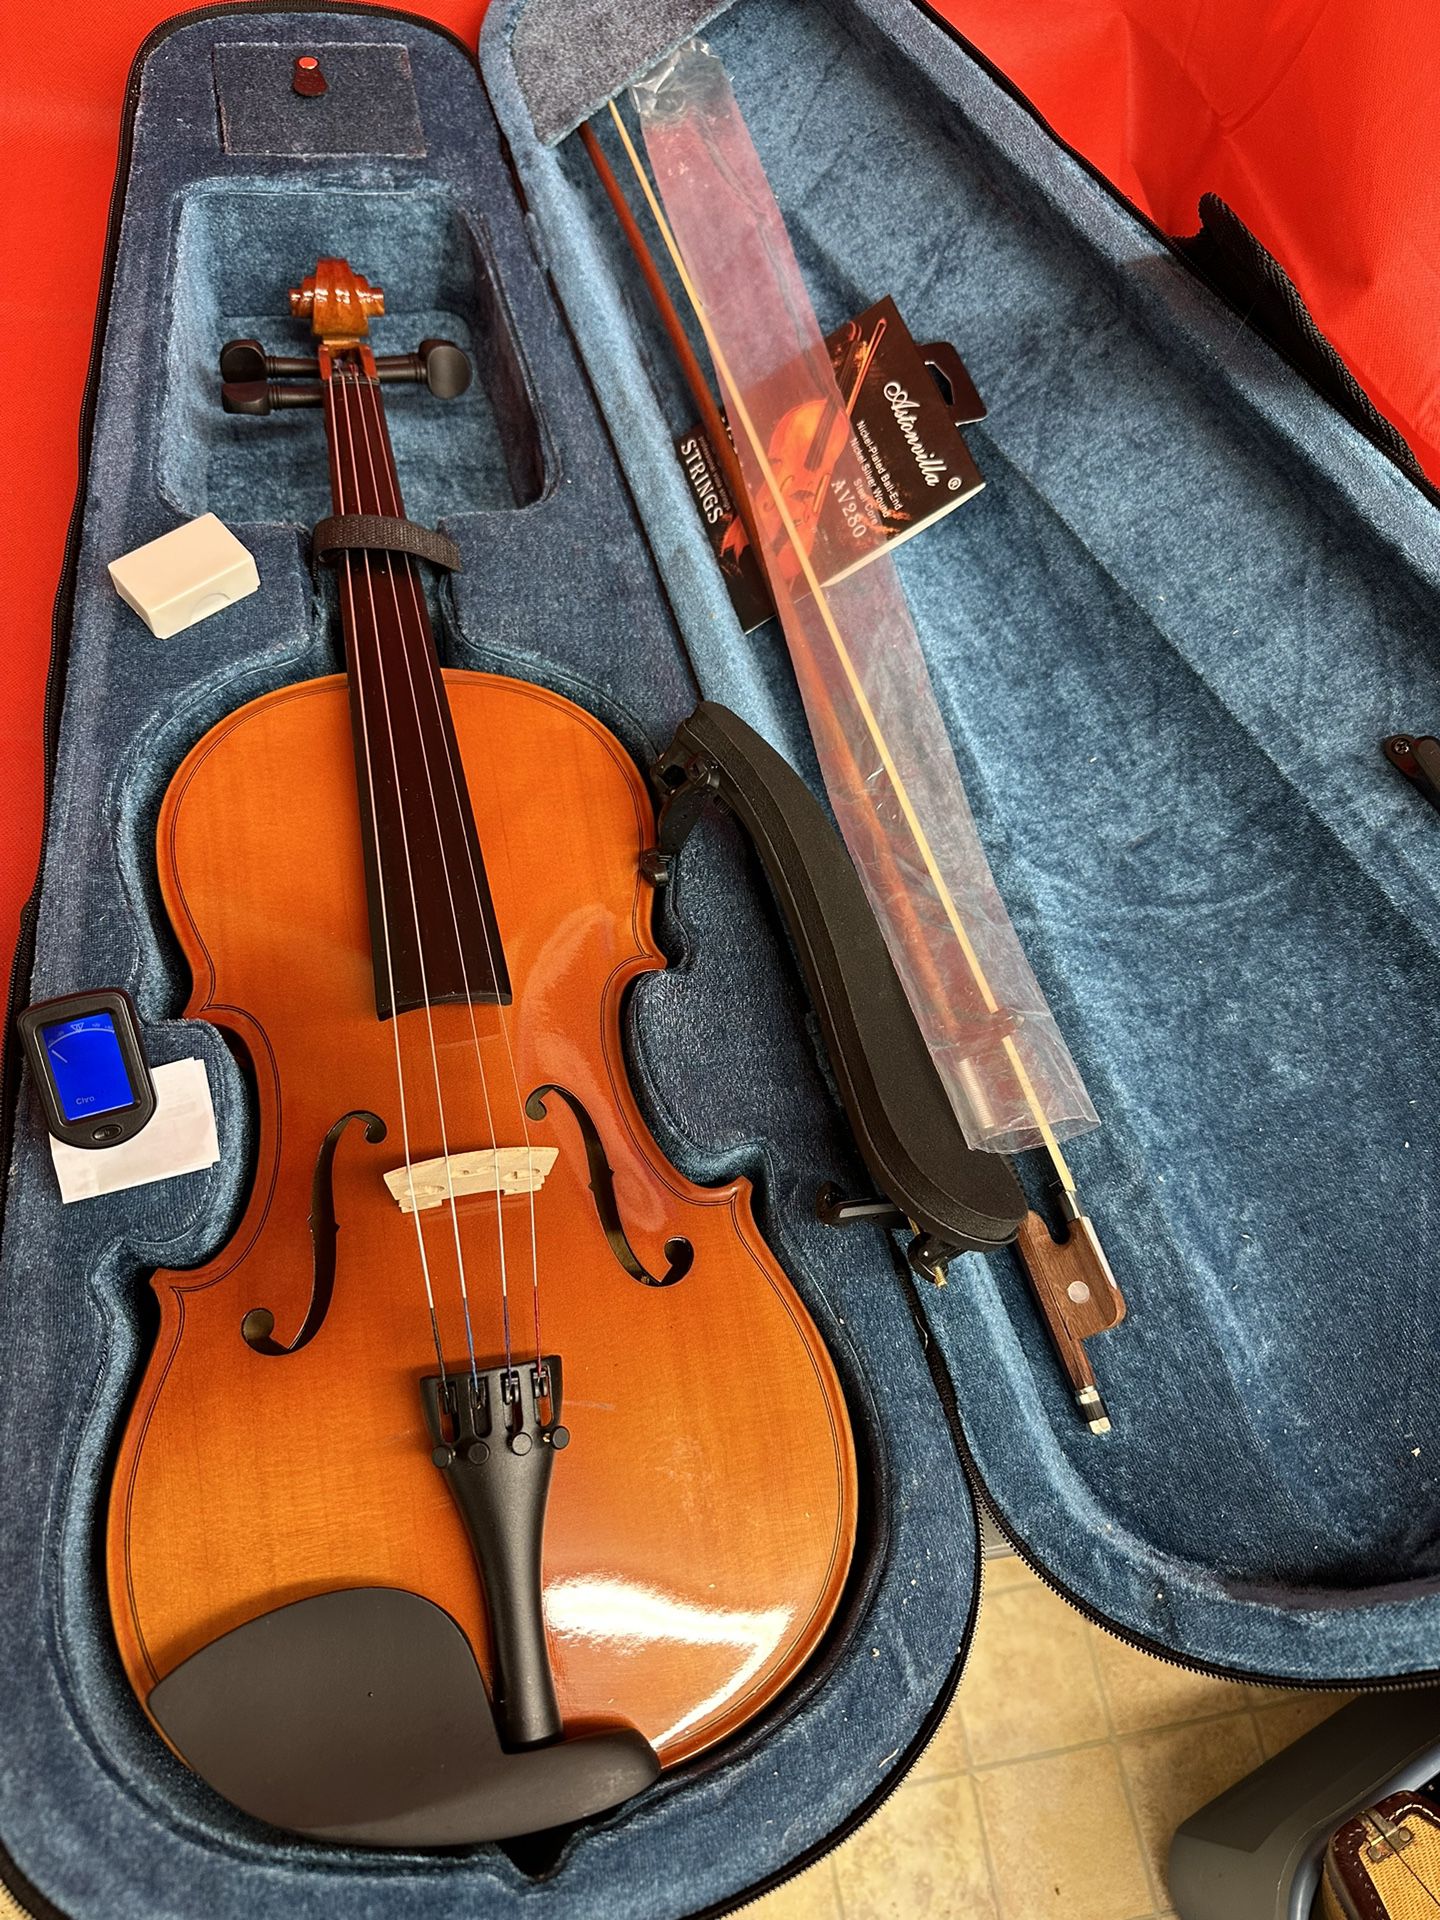 Beautiful 16 inch Viola with New Bow, Shoulder Rest, Digital Tuner, Extra Strings $180 Firm